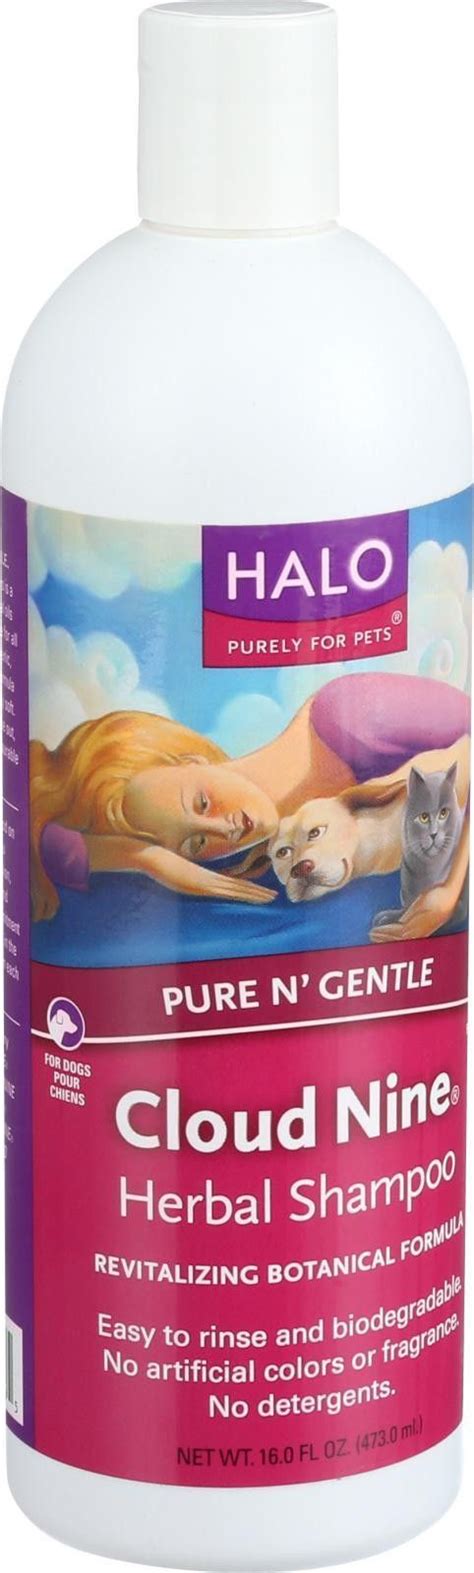 Perfectly formulated for hair growth. Halo Purely For Pets Cloud Nine Herbal Shampoo - 16 Oz ...